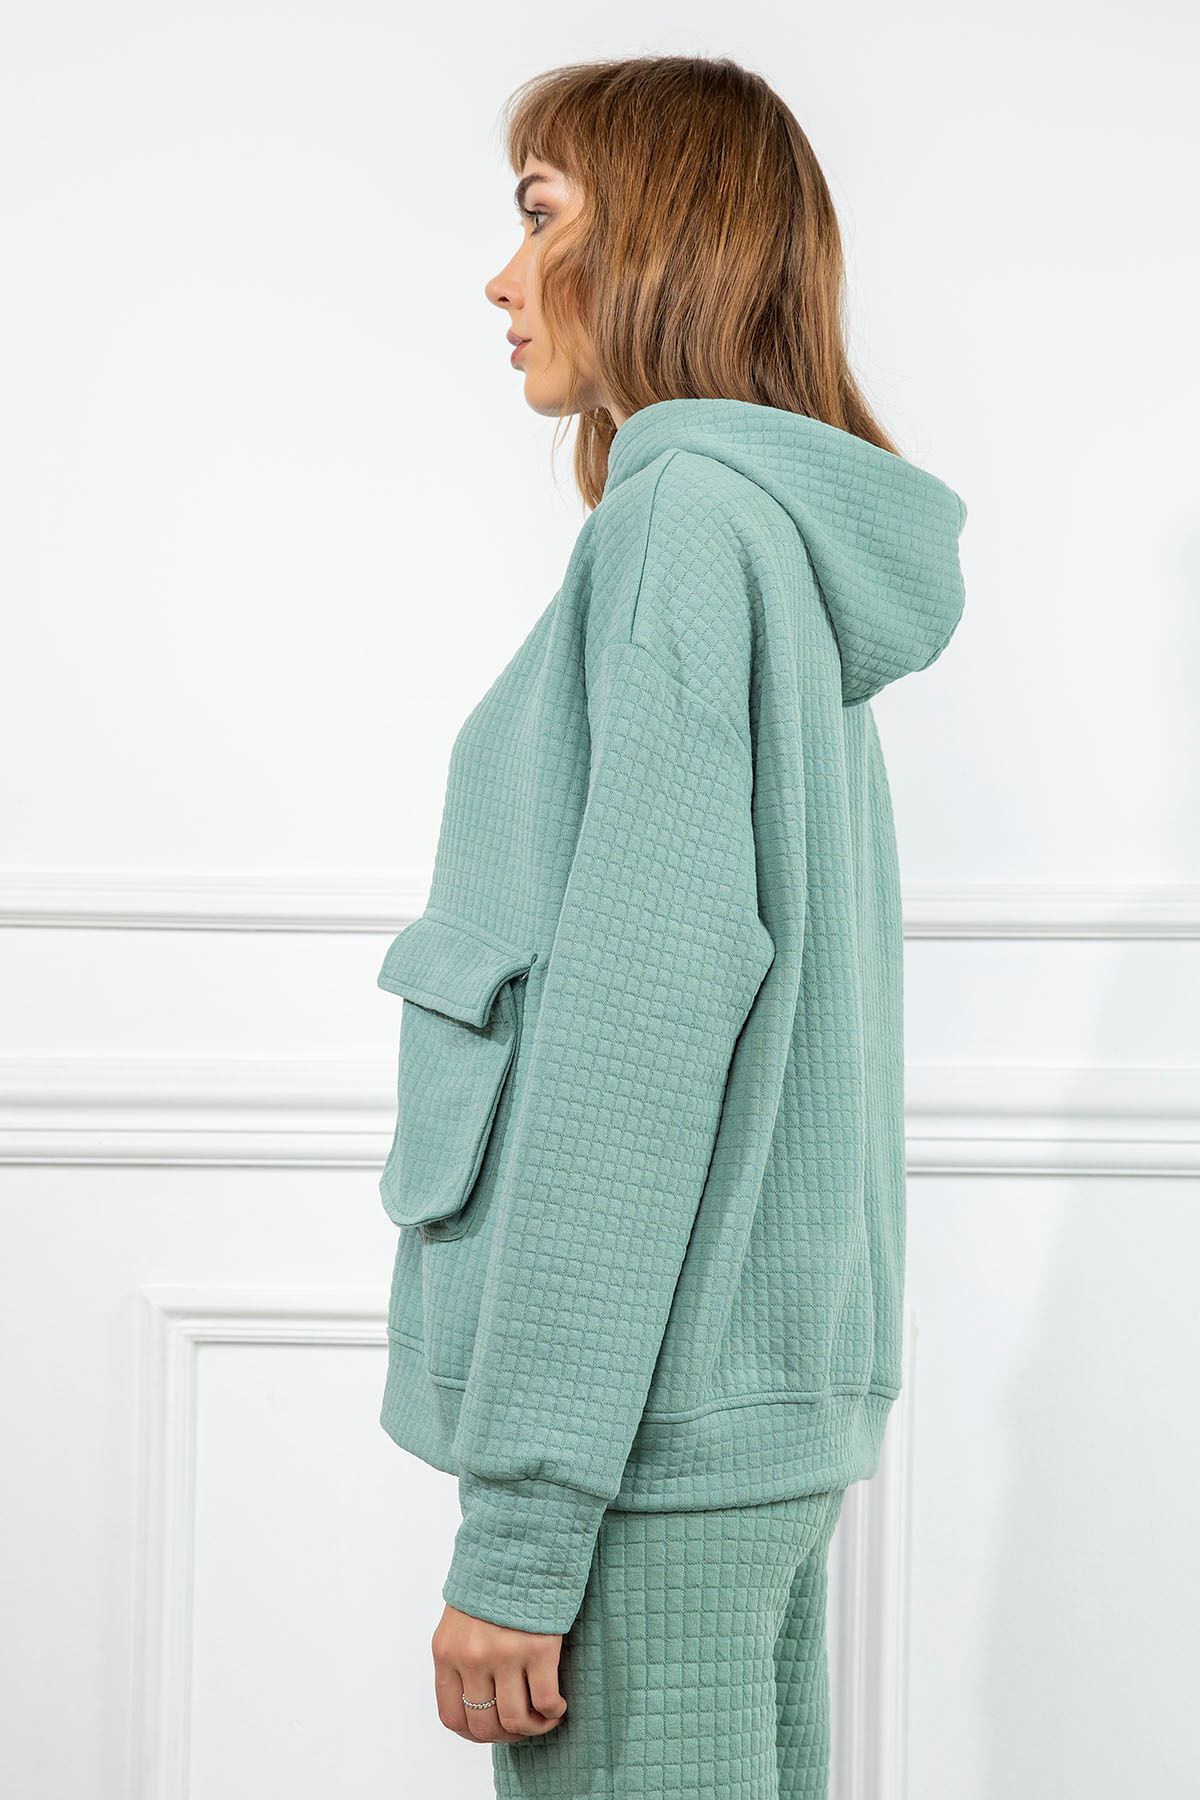 Quilted Fabric Hooded Hip Height Oversize Pocket Detailed Women Sweatshirt - Mint